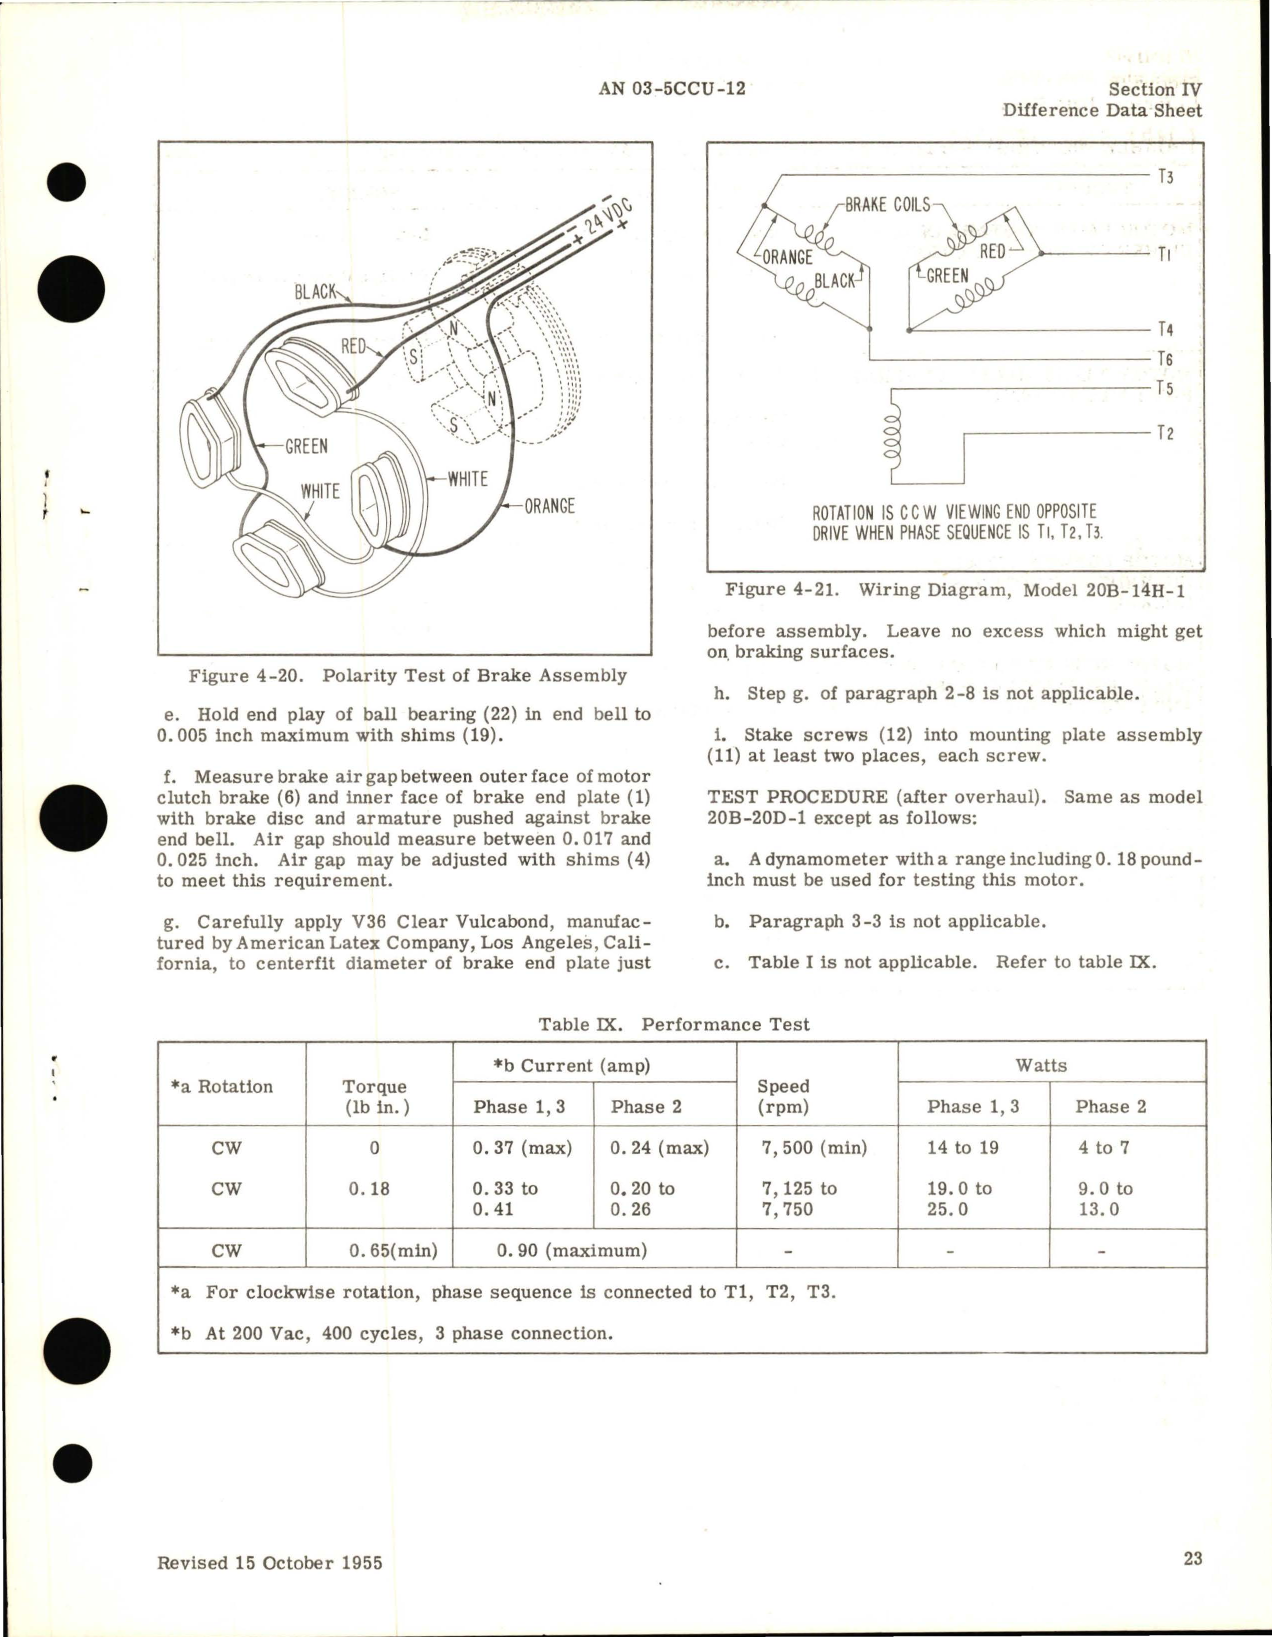 Sample page 7 from AirCorps Library document: Overhaul Instructions for Fractional Horsepower Electric Motors - 20 Frame Series